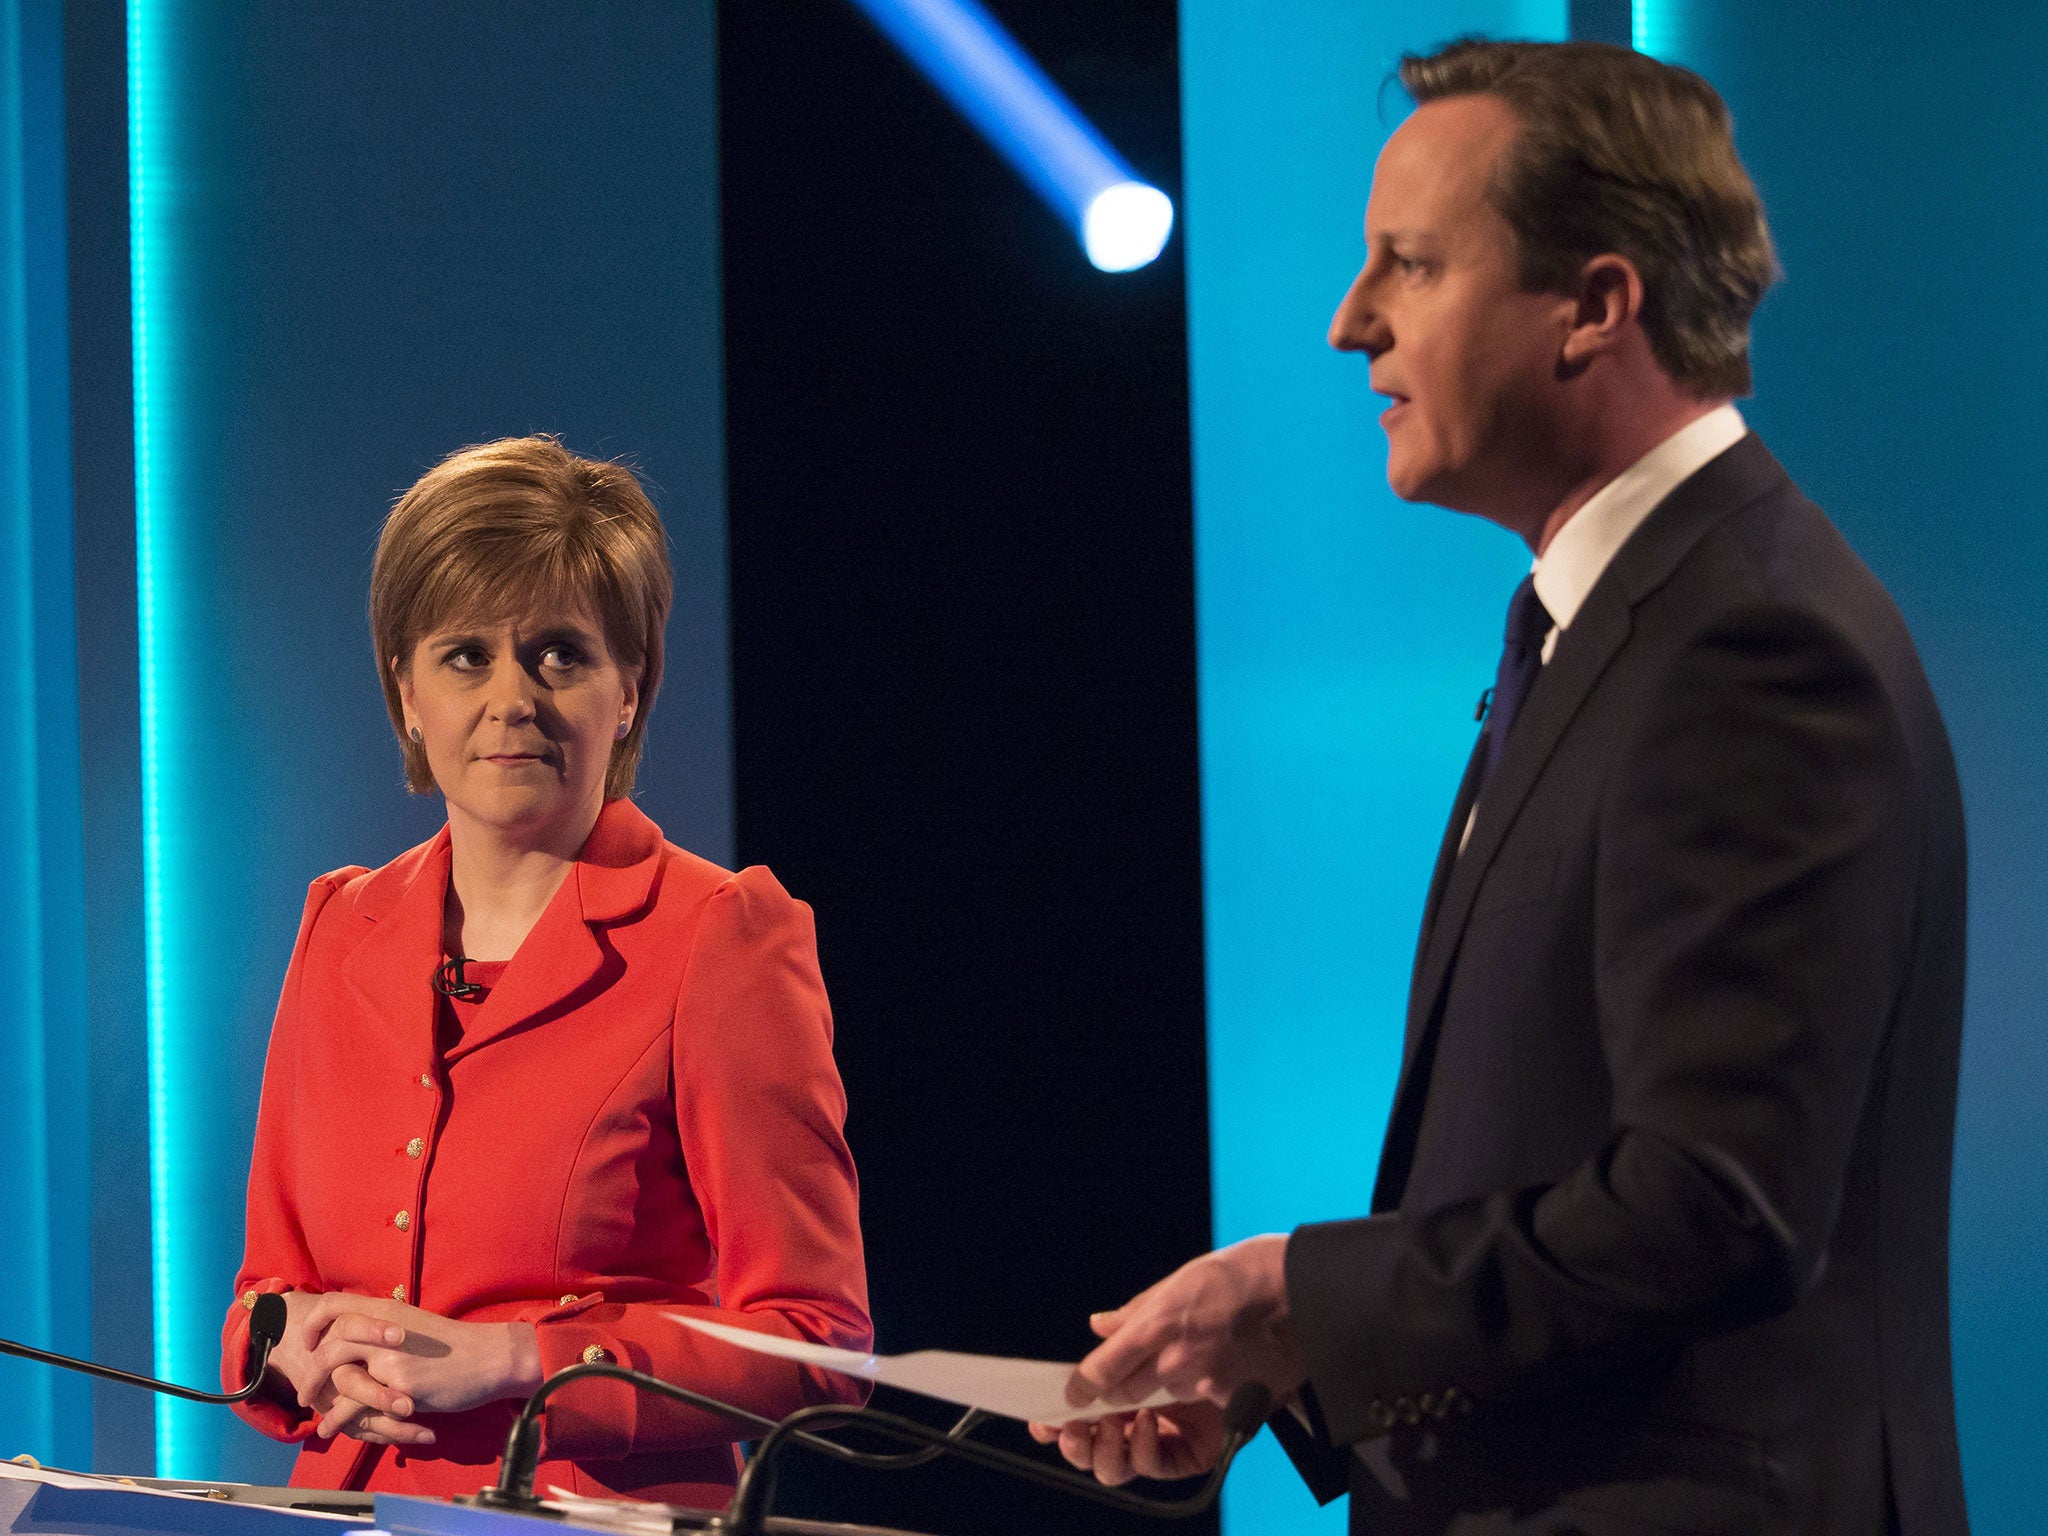 SNP leader Nicola Sturgeon debating with the Prime Minister in April